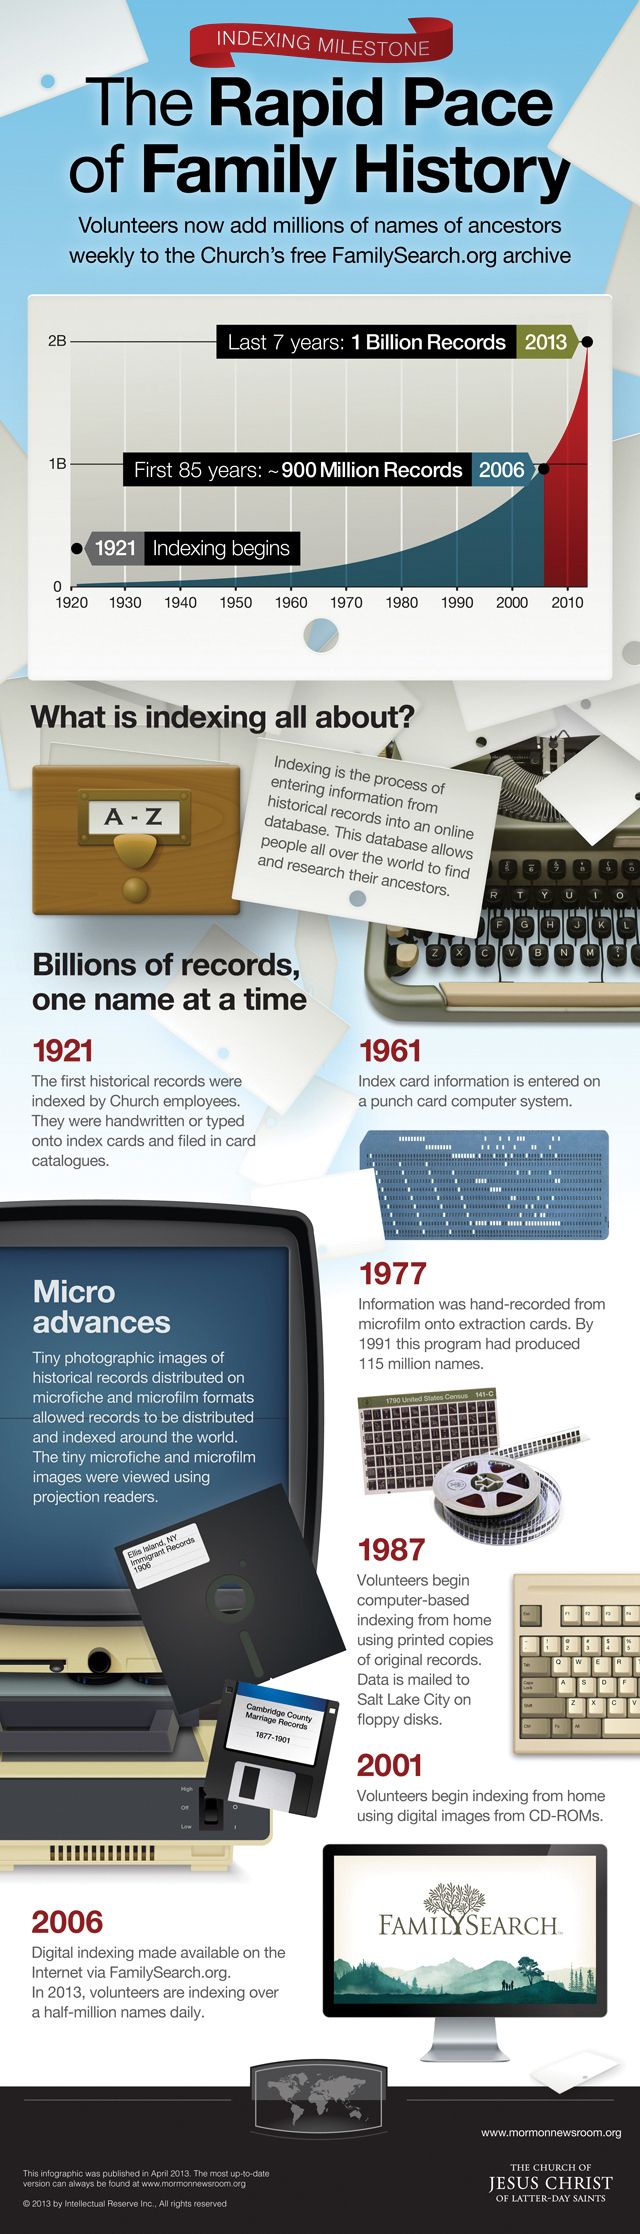 An infographic outlining the purpose of indexing and its progress over time. Learn more at mormonnewsroom.org.